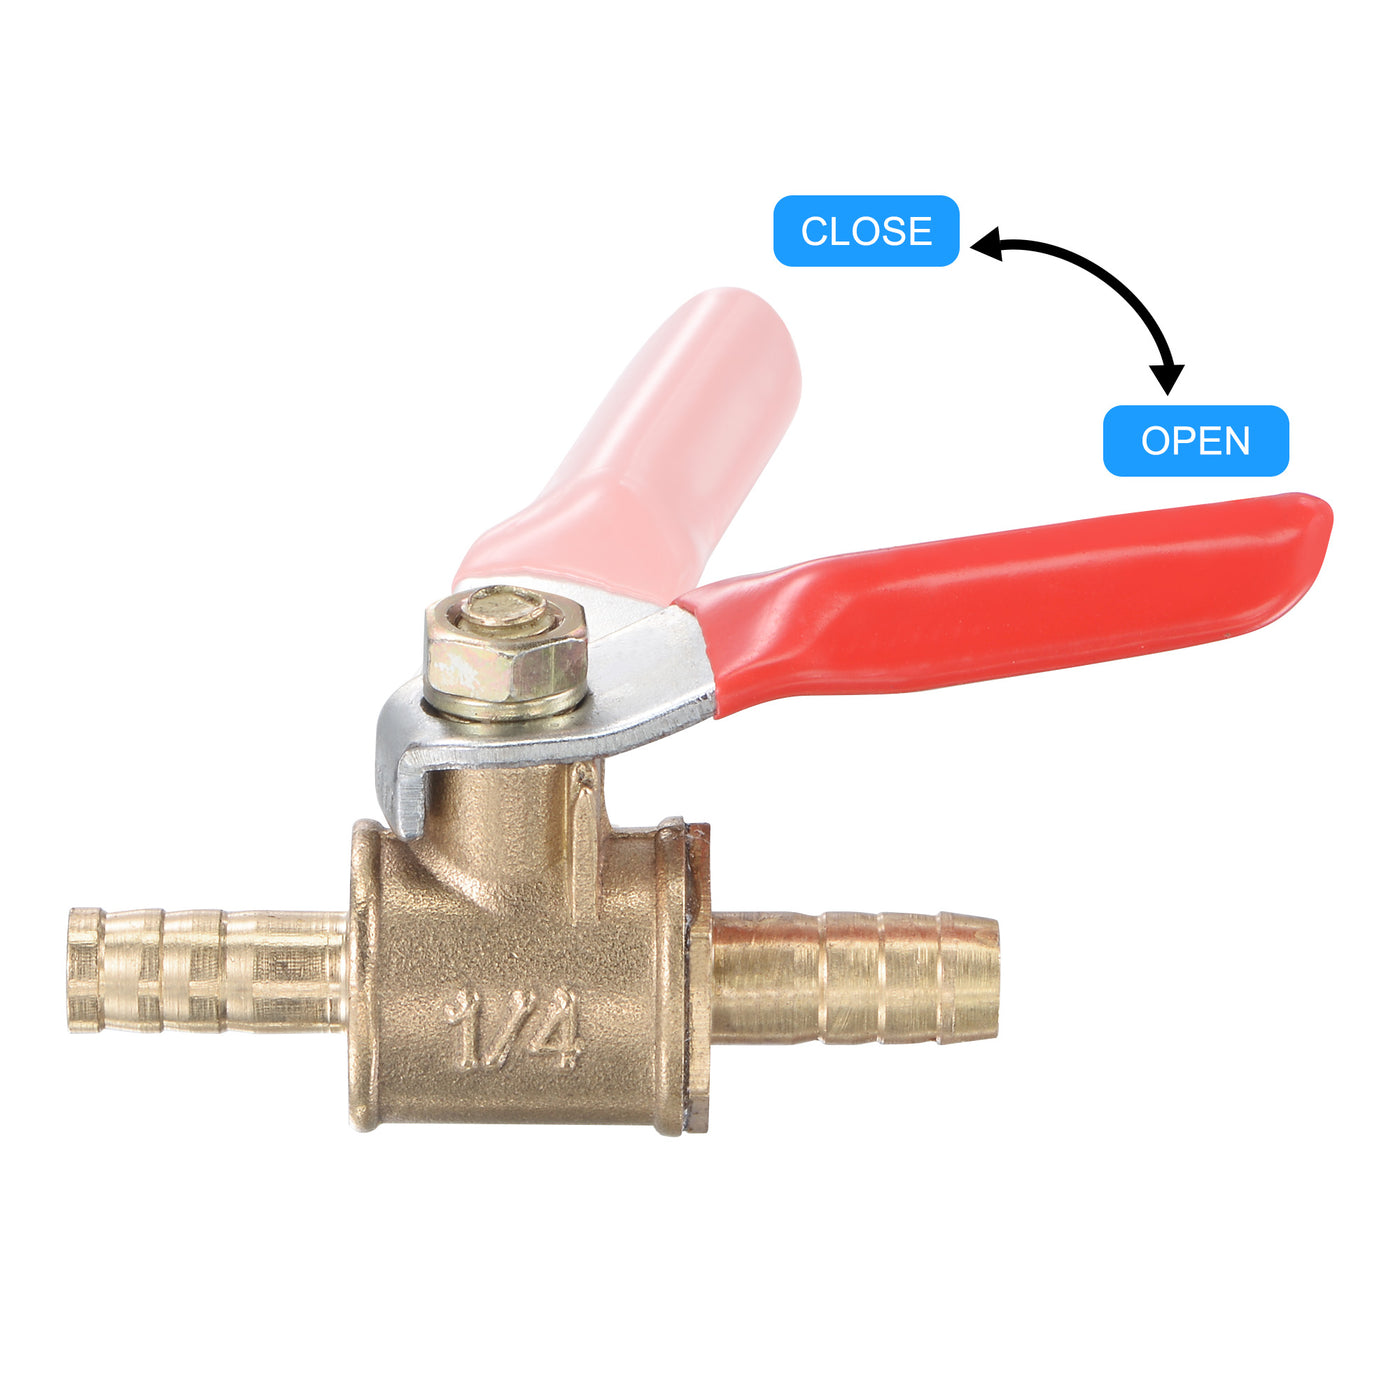 Uxcell Uxcell Brass Air Ball Valve Shut Off Switch 12mm Hose Barb to 12mm Hose Barb with Clamps Red Handle 2Pcs